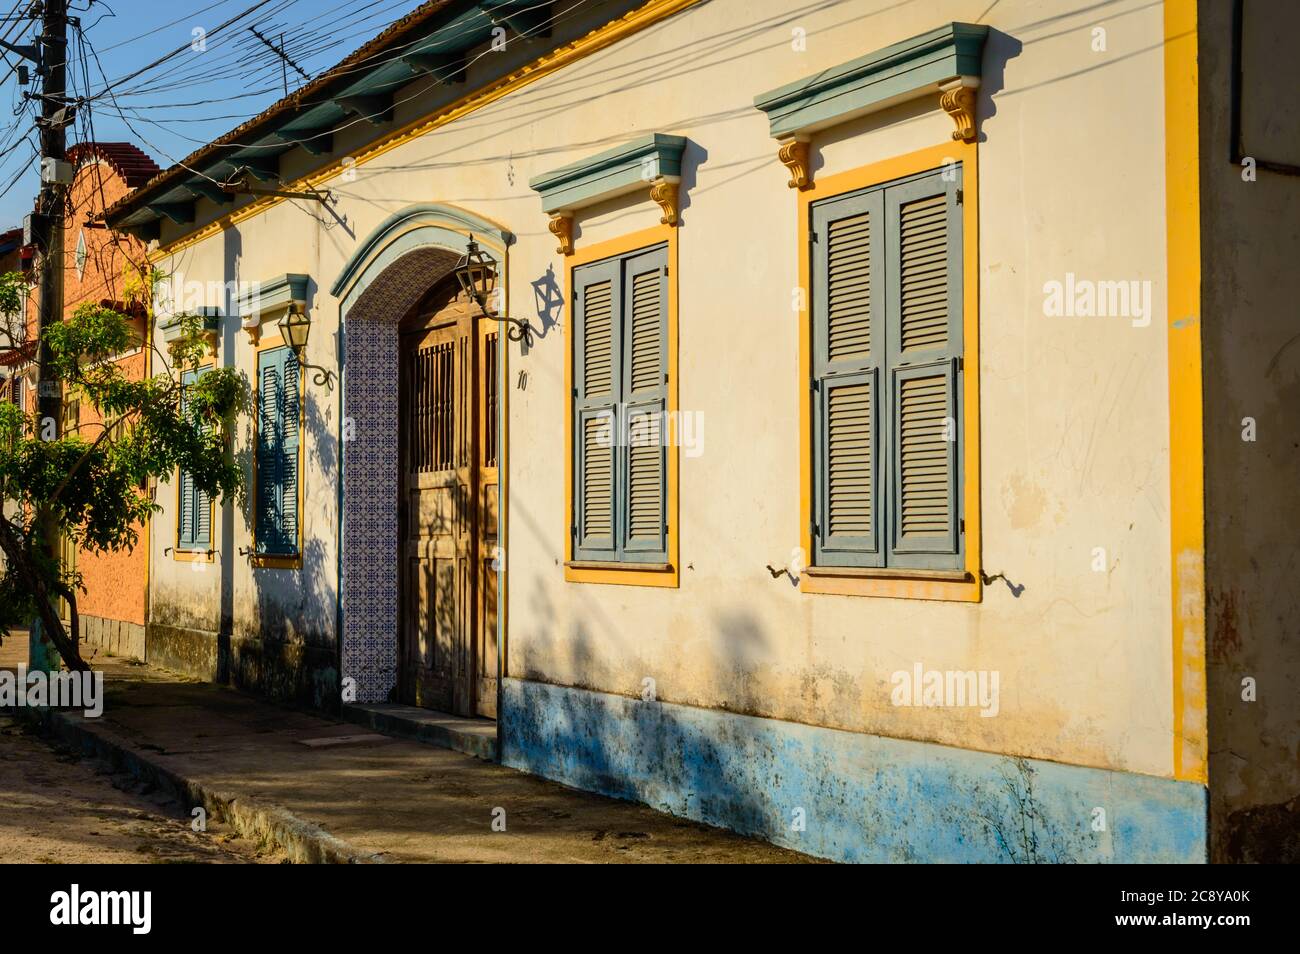 A Portuguese colonial home with blue window shutters and yellow trim and blue tile around the arch door. Stock Photo